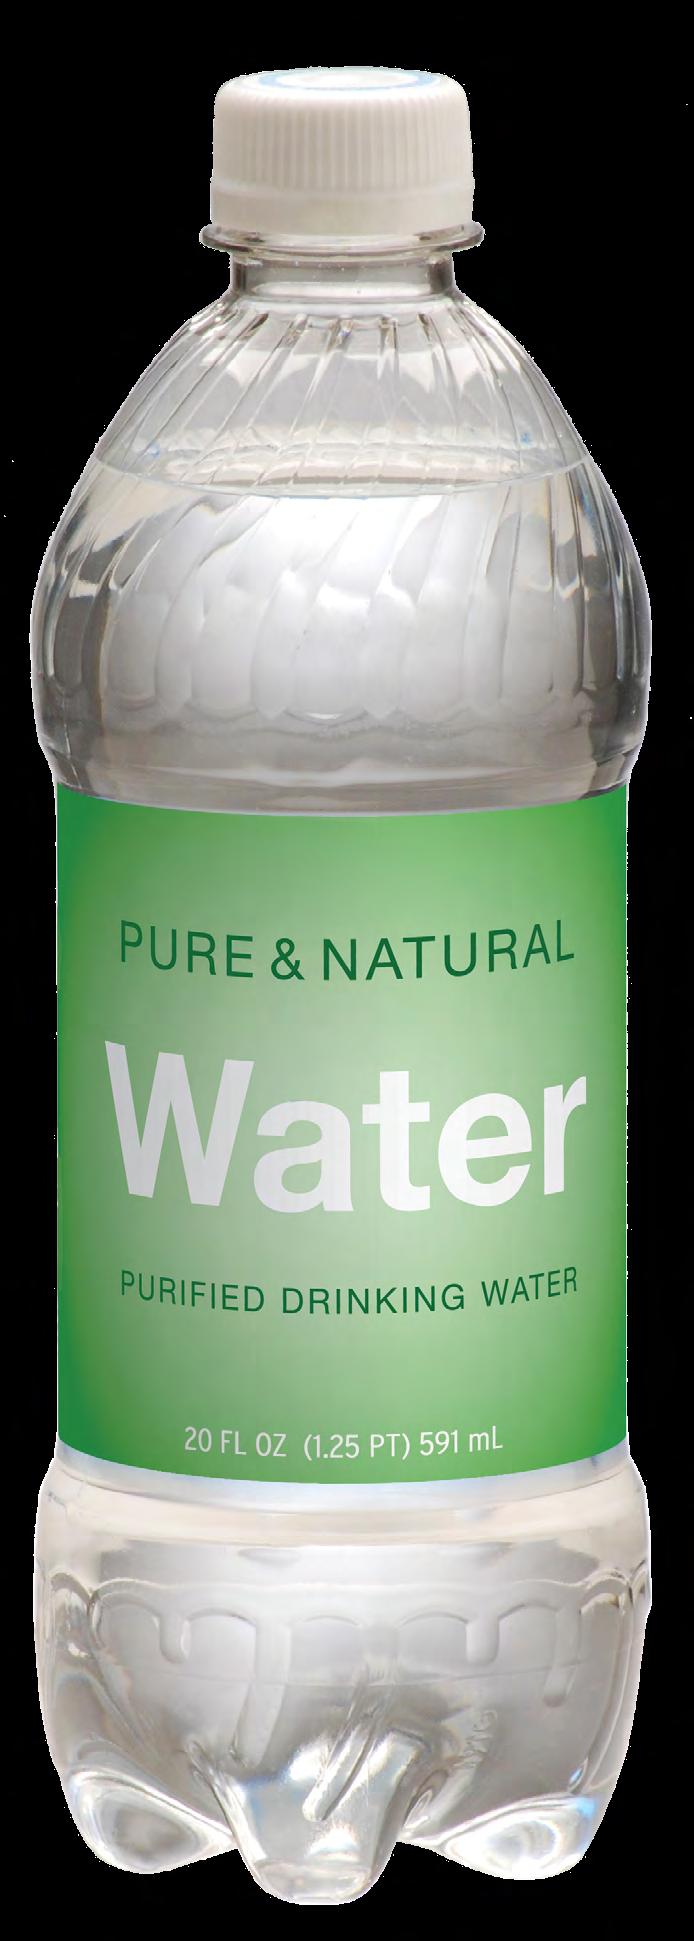 Water Serving Size 20 fl oz (591 ml) Servings Per Container 1 Calories 0 Calories from Fat 0 Sodium 0mg 0%